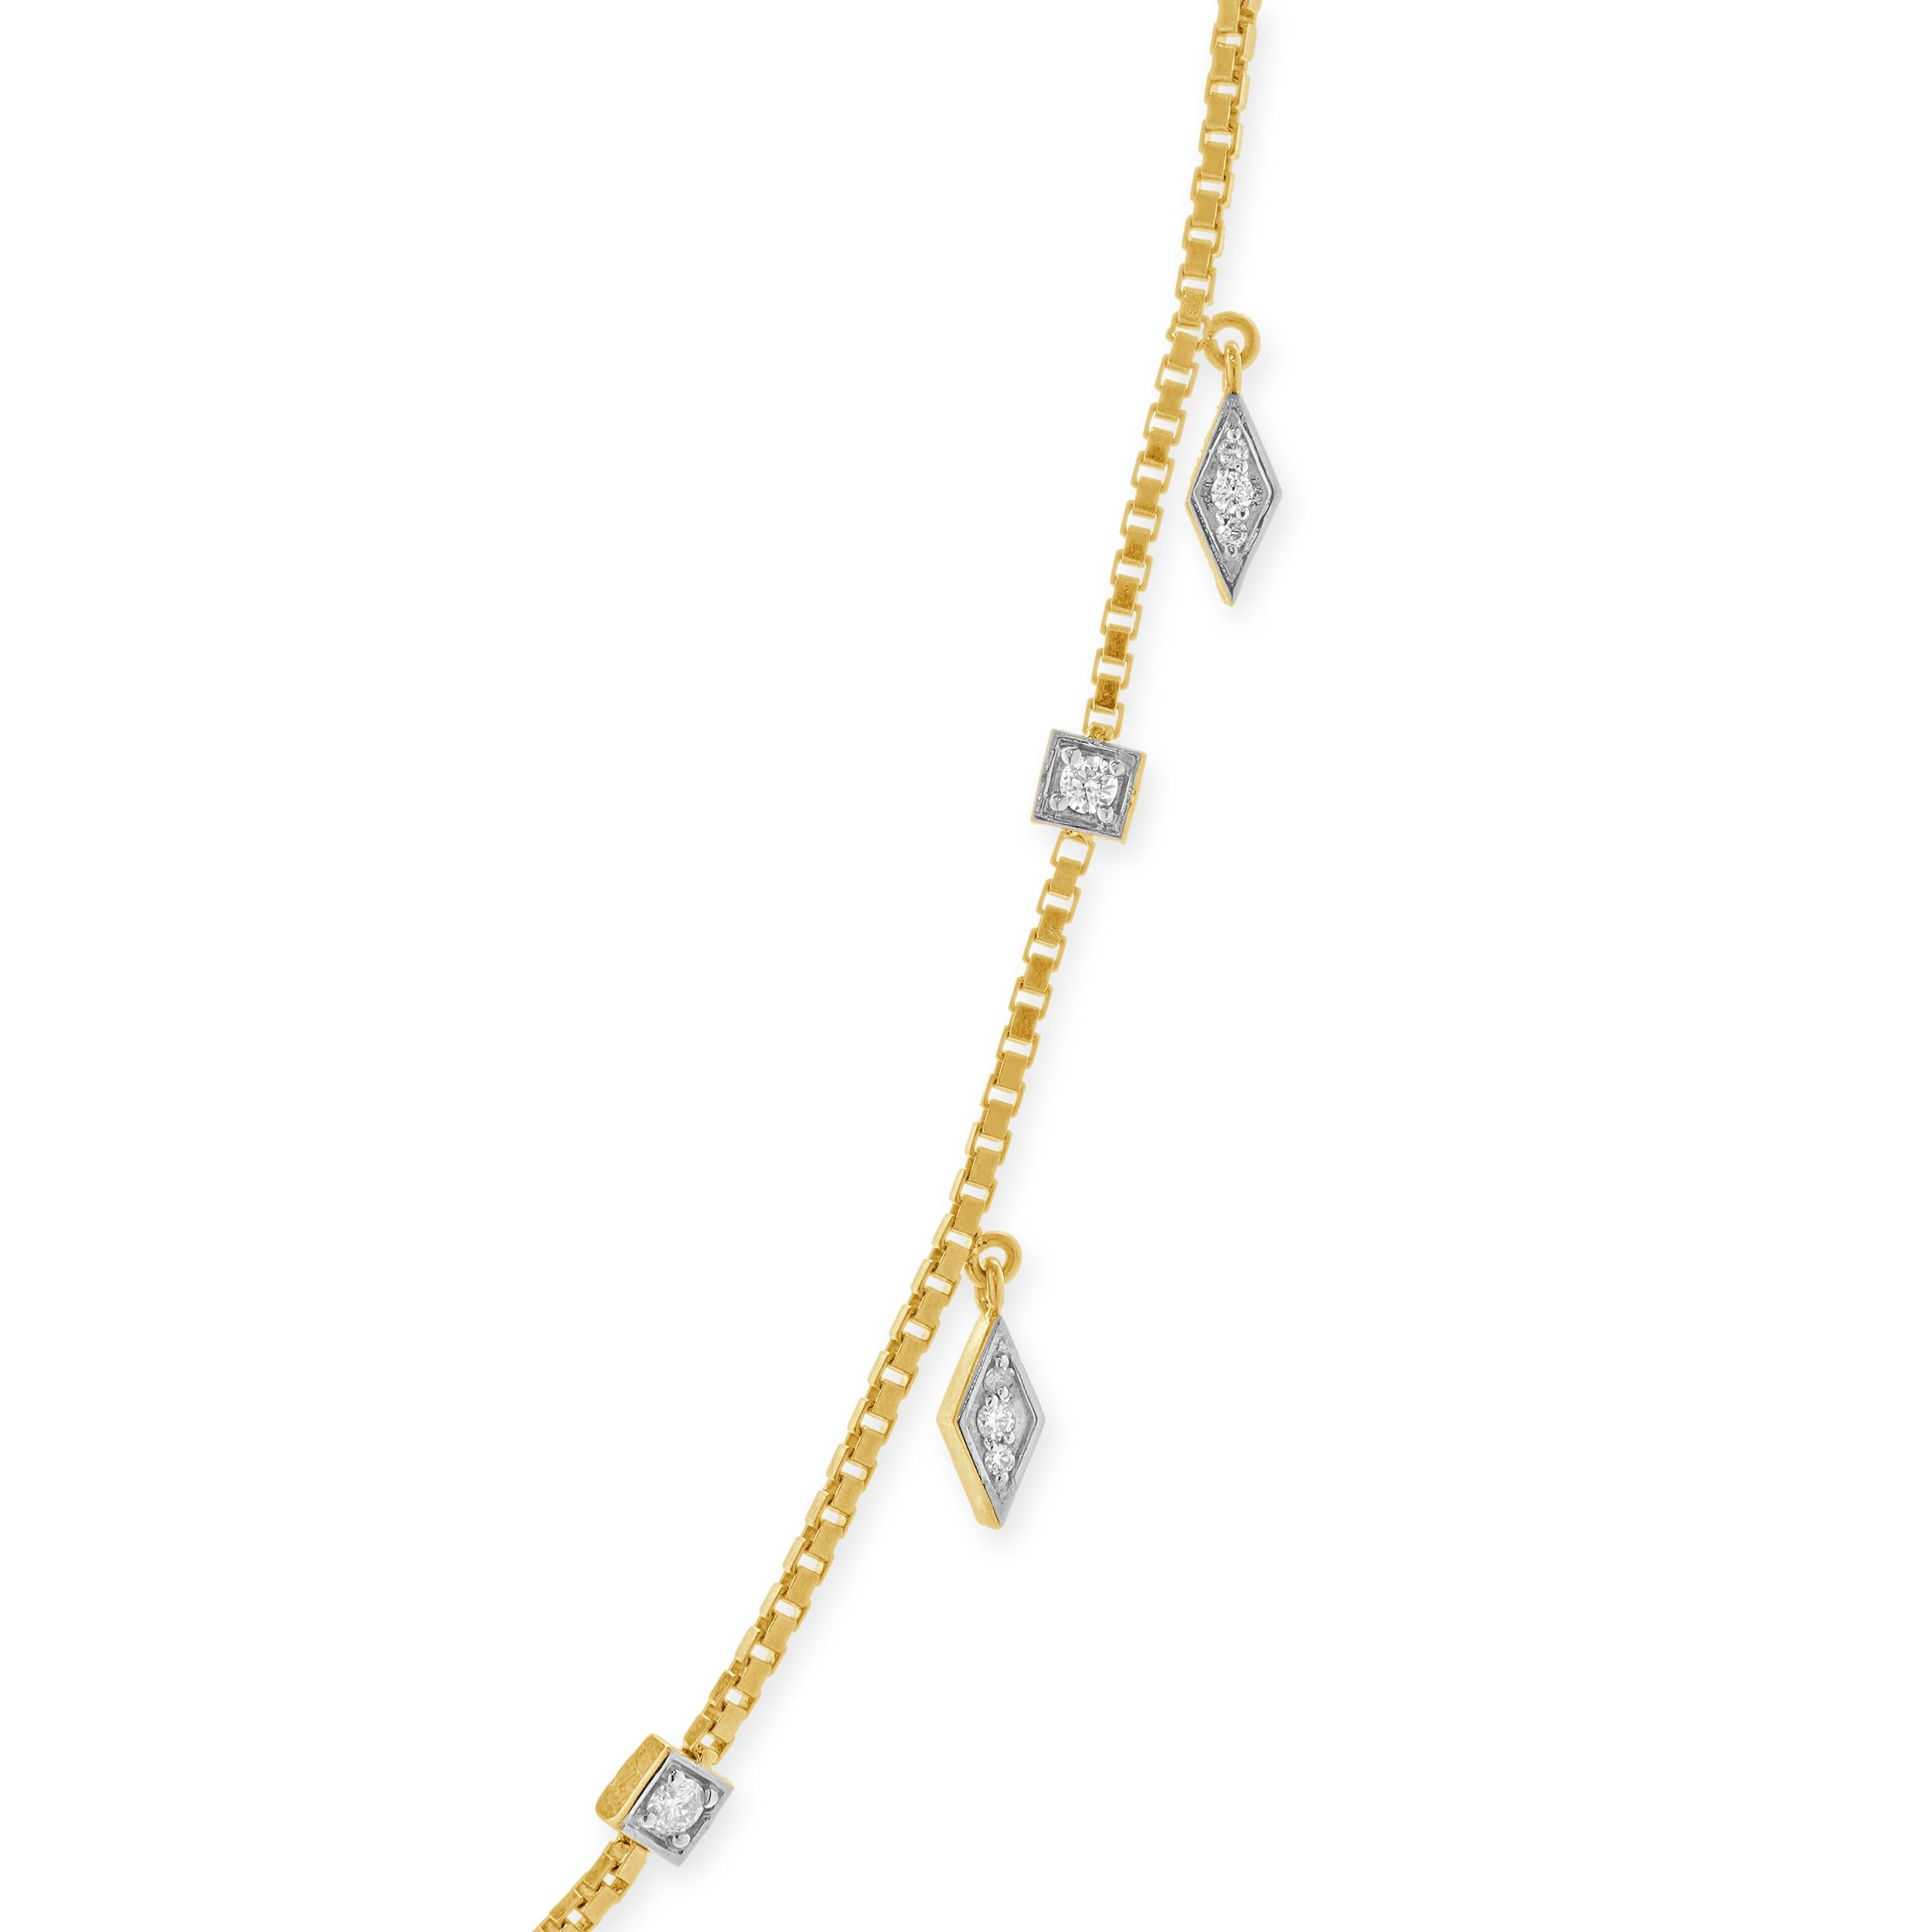 Designer: custom
Material: 14K yellow gold
Diamonds: round brilliant cut = 0.50cttw
Color: H
Clarity: SI1
Dimensions: necklace measures 18-inches in length 
Weight: 9.80 grams
